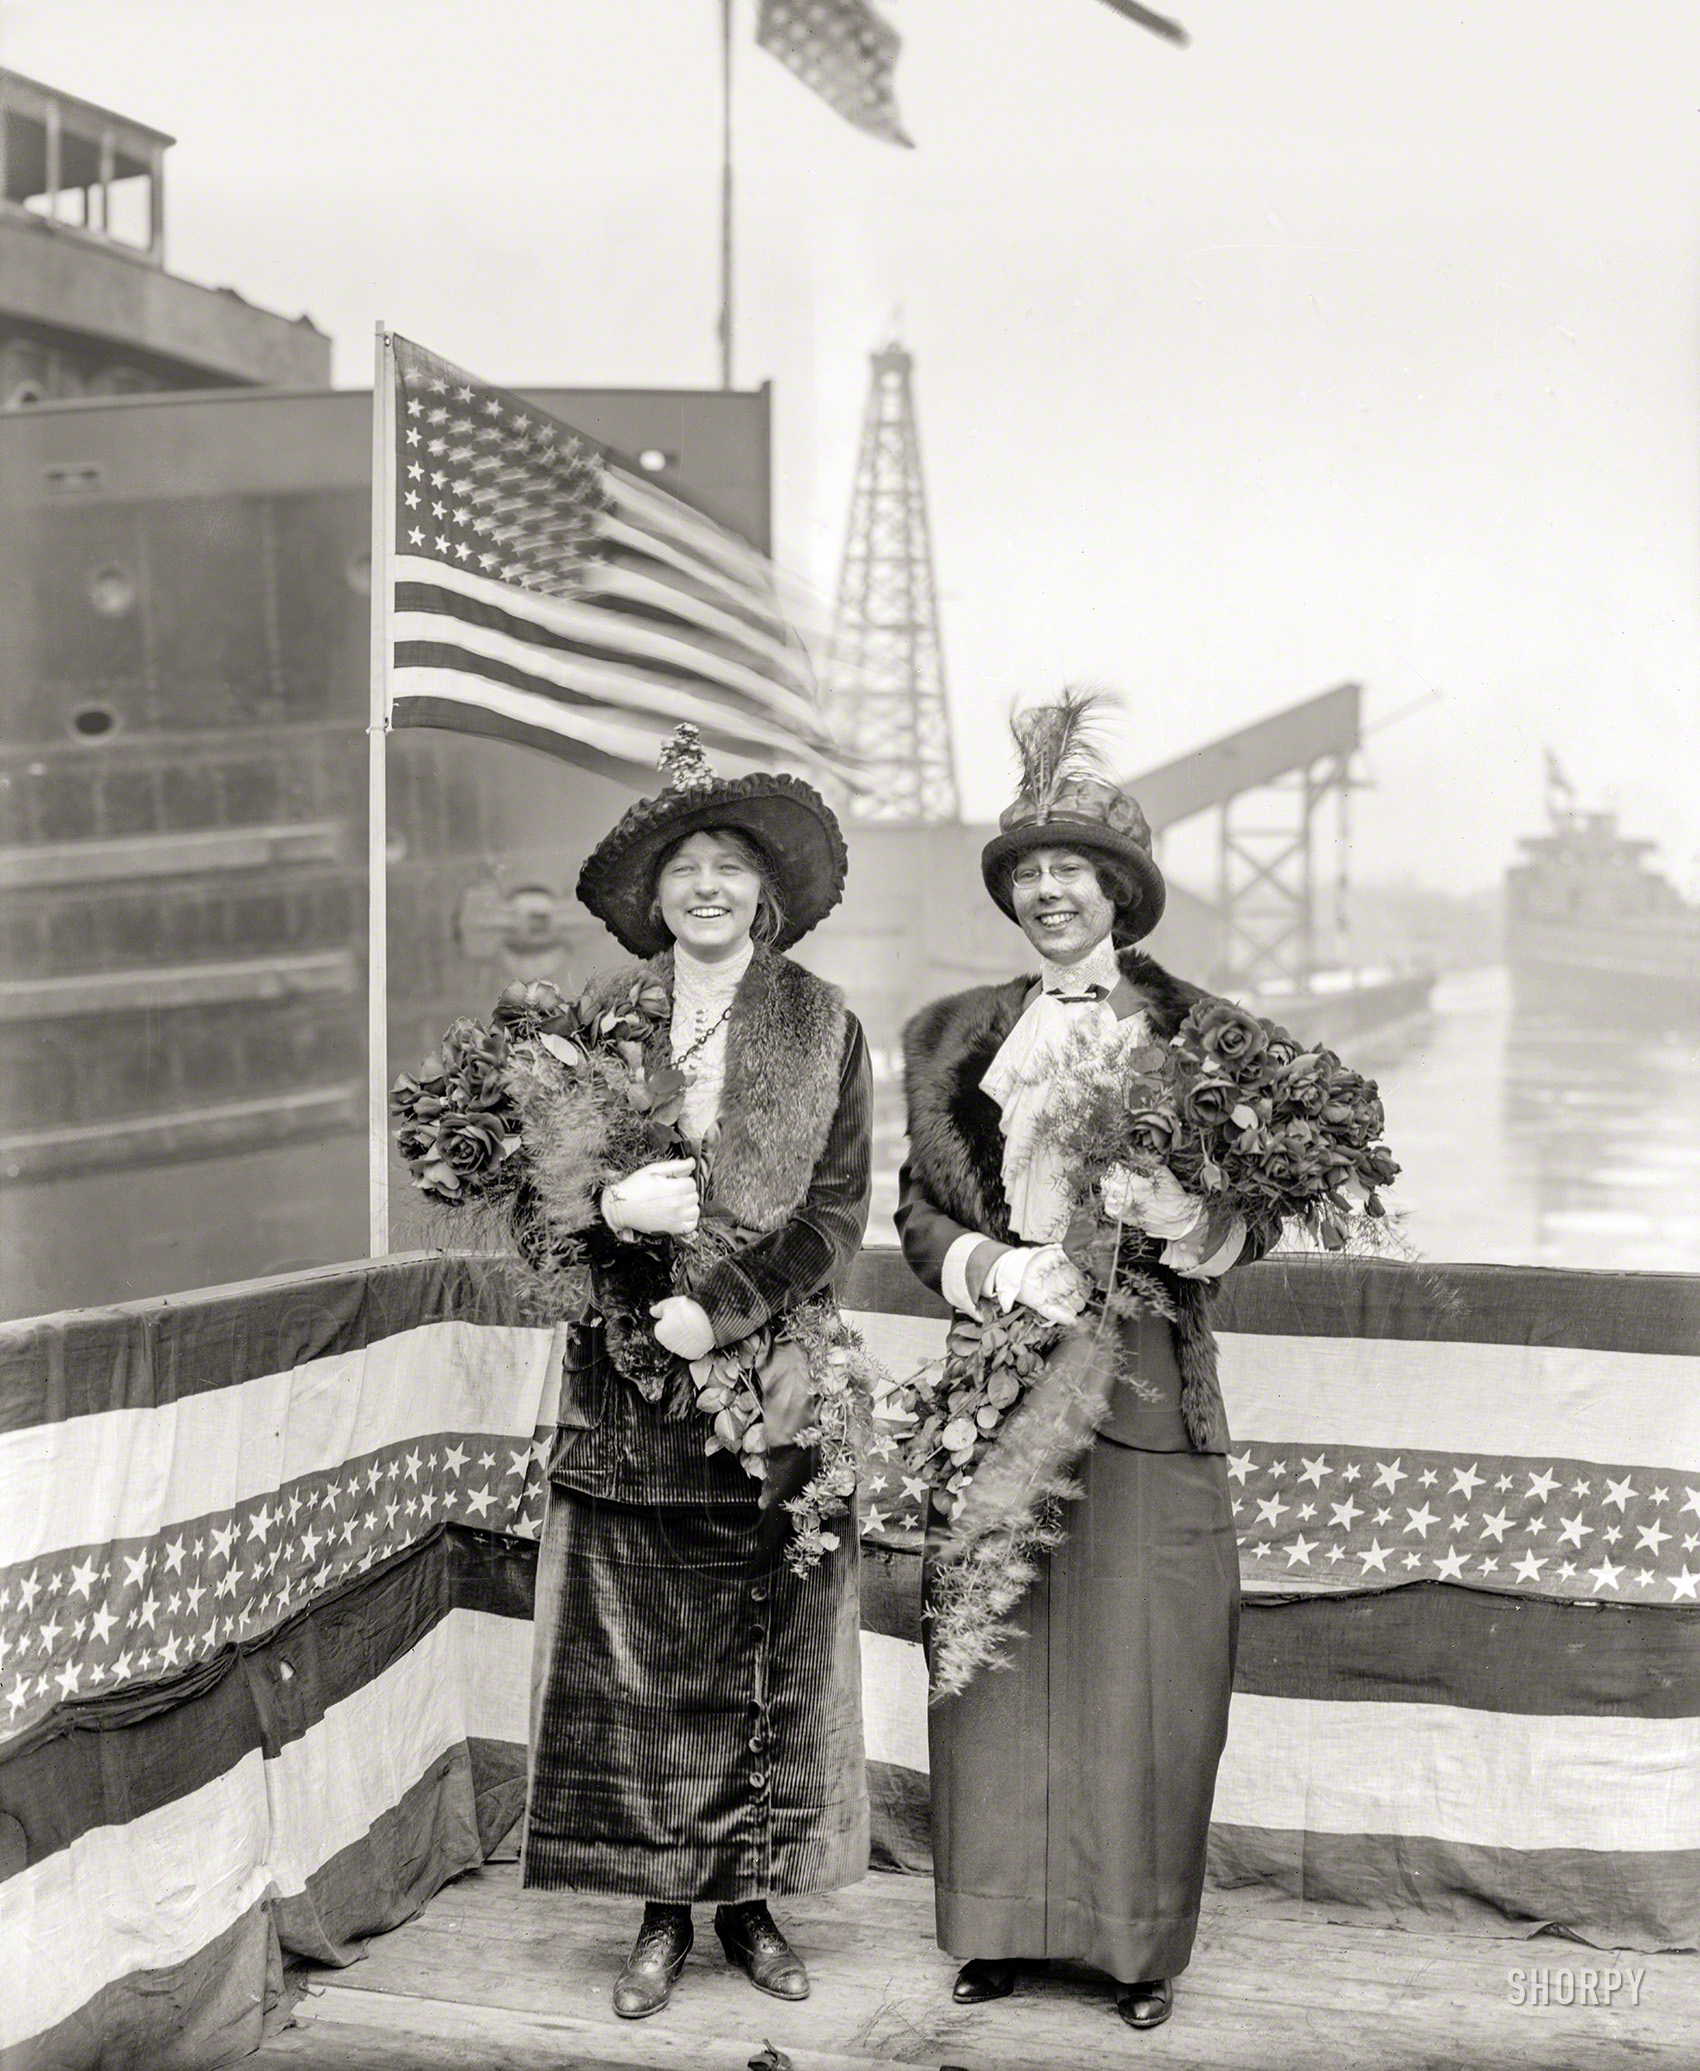 March 8, 1913. Wyandotte, Michigan. "Steamers A.D. MacTier and F.P. Jones, sponsors." 8x10 inch dry plate glass negative. View full size.